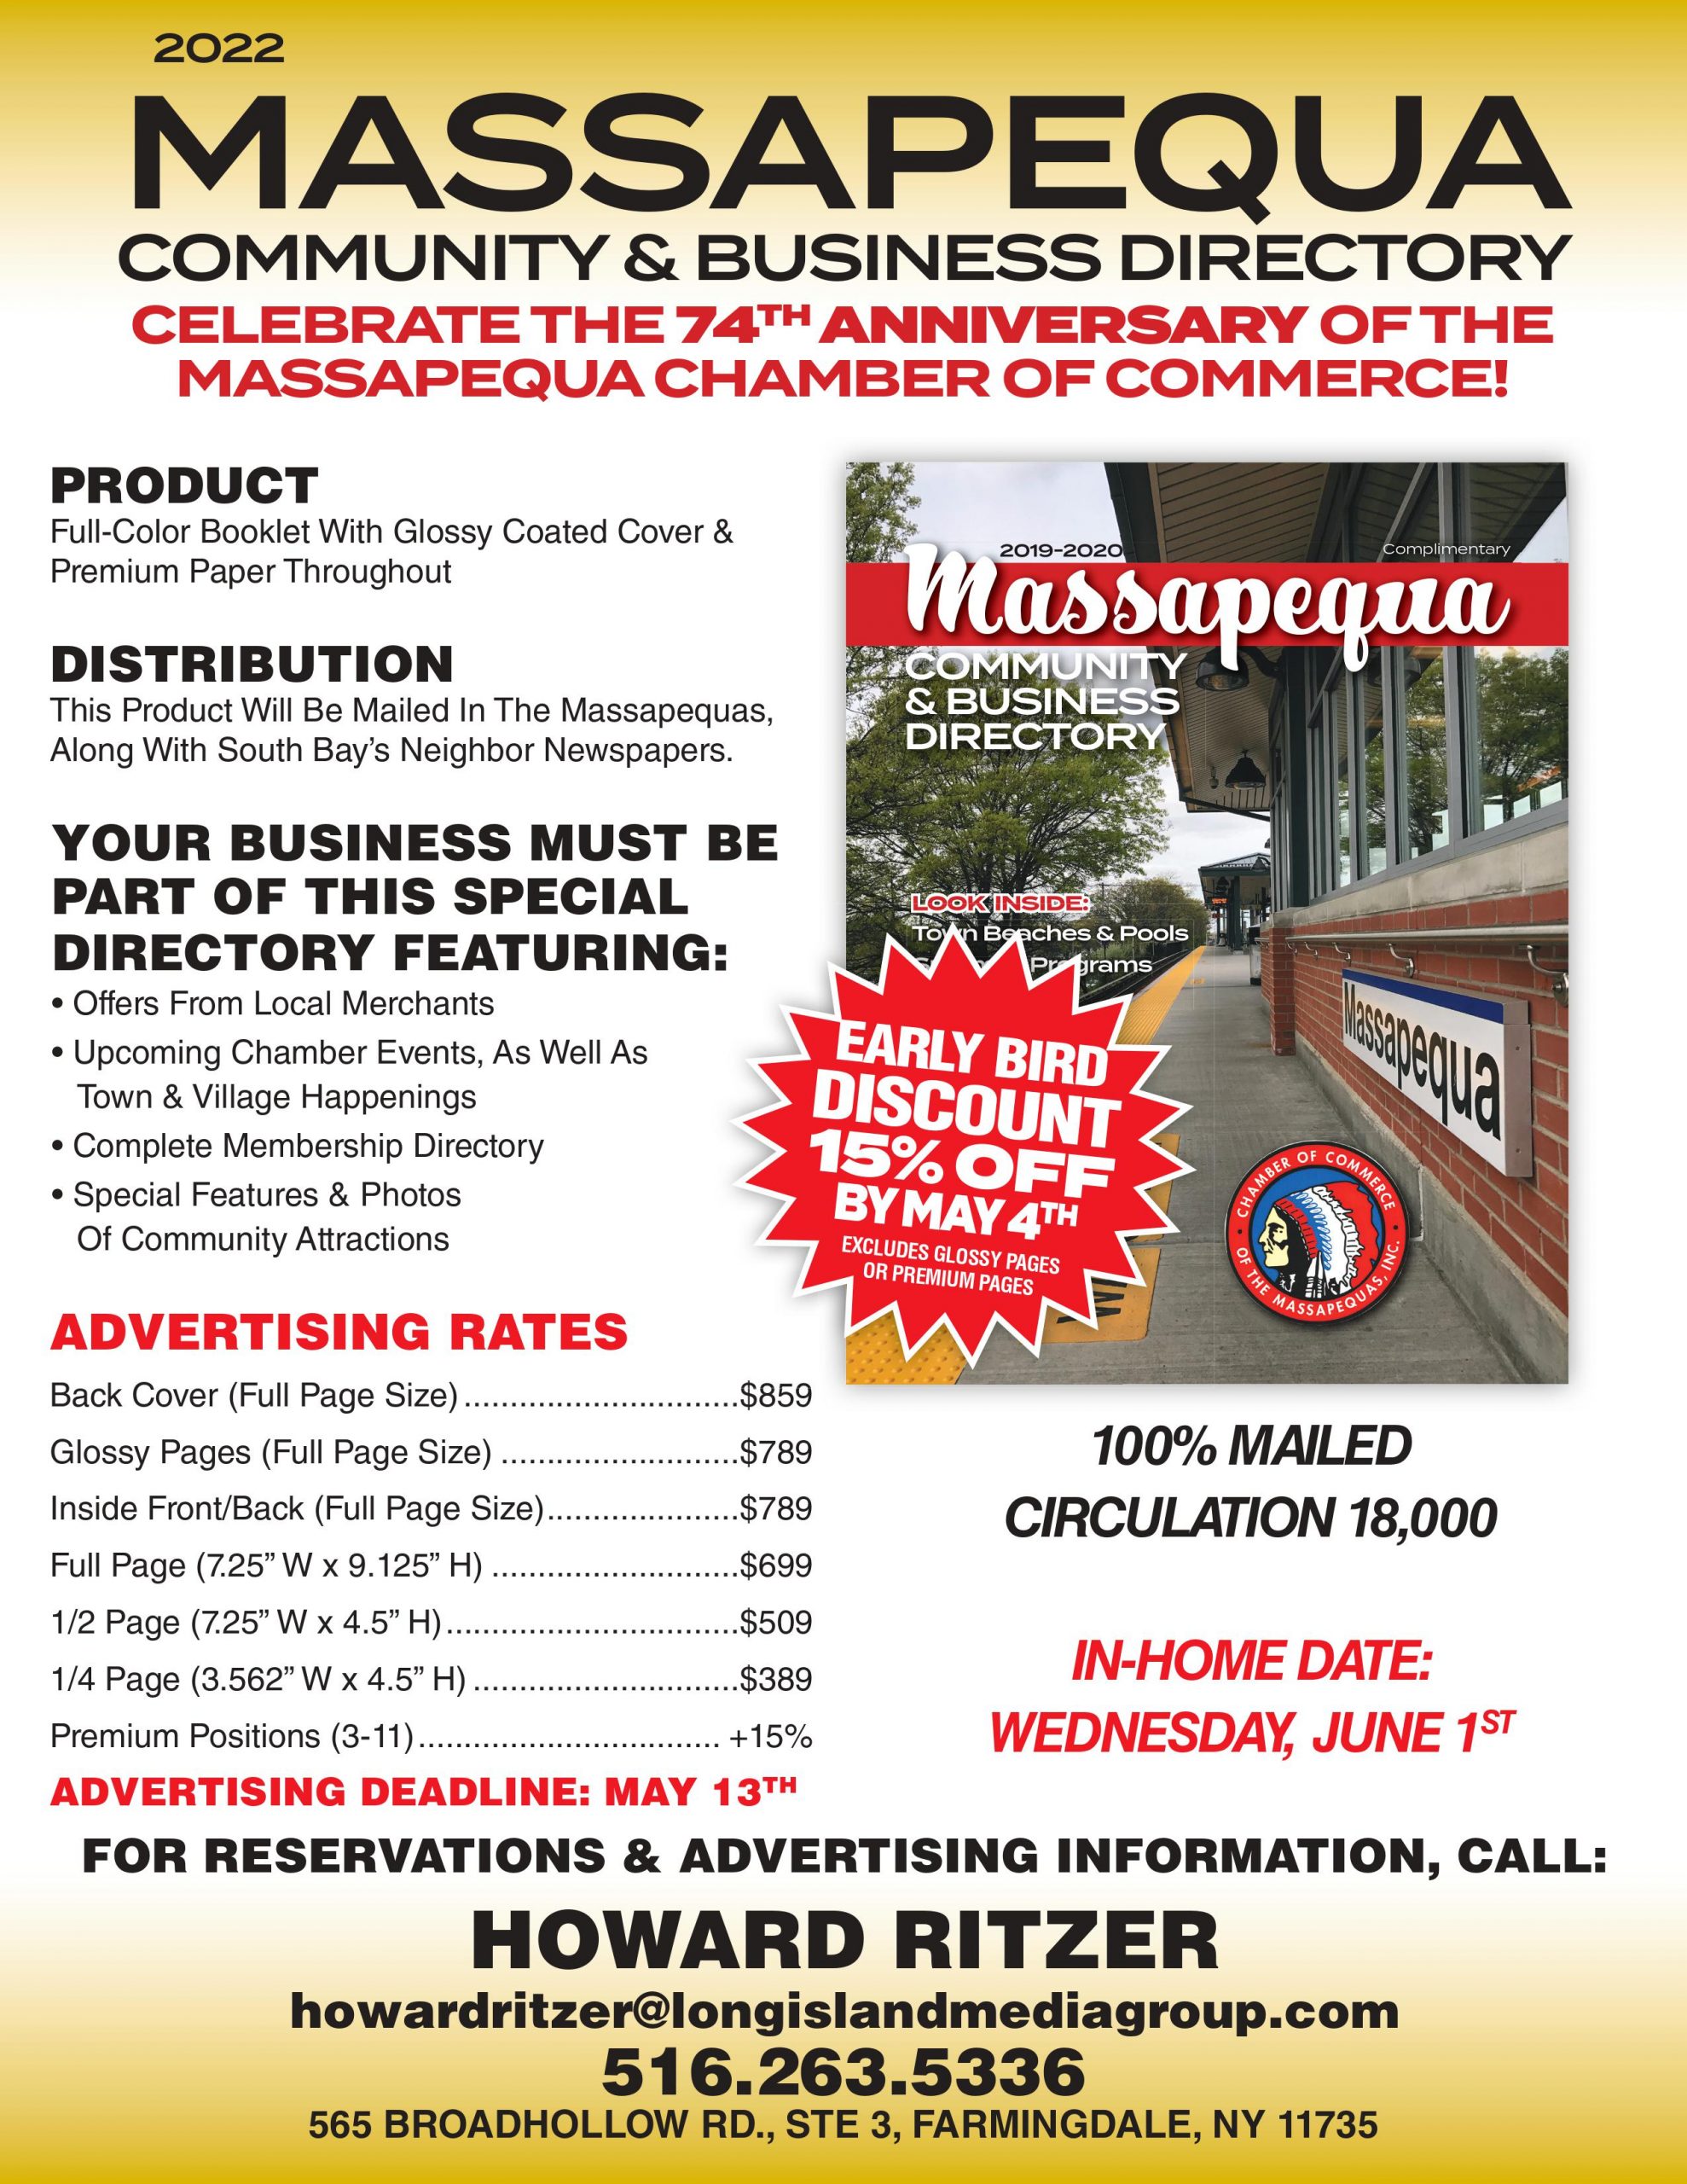 Business Directory Advertising